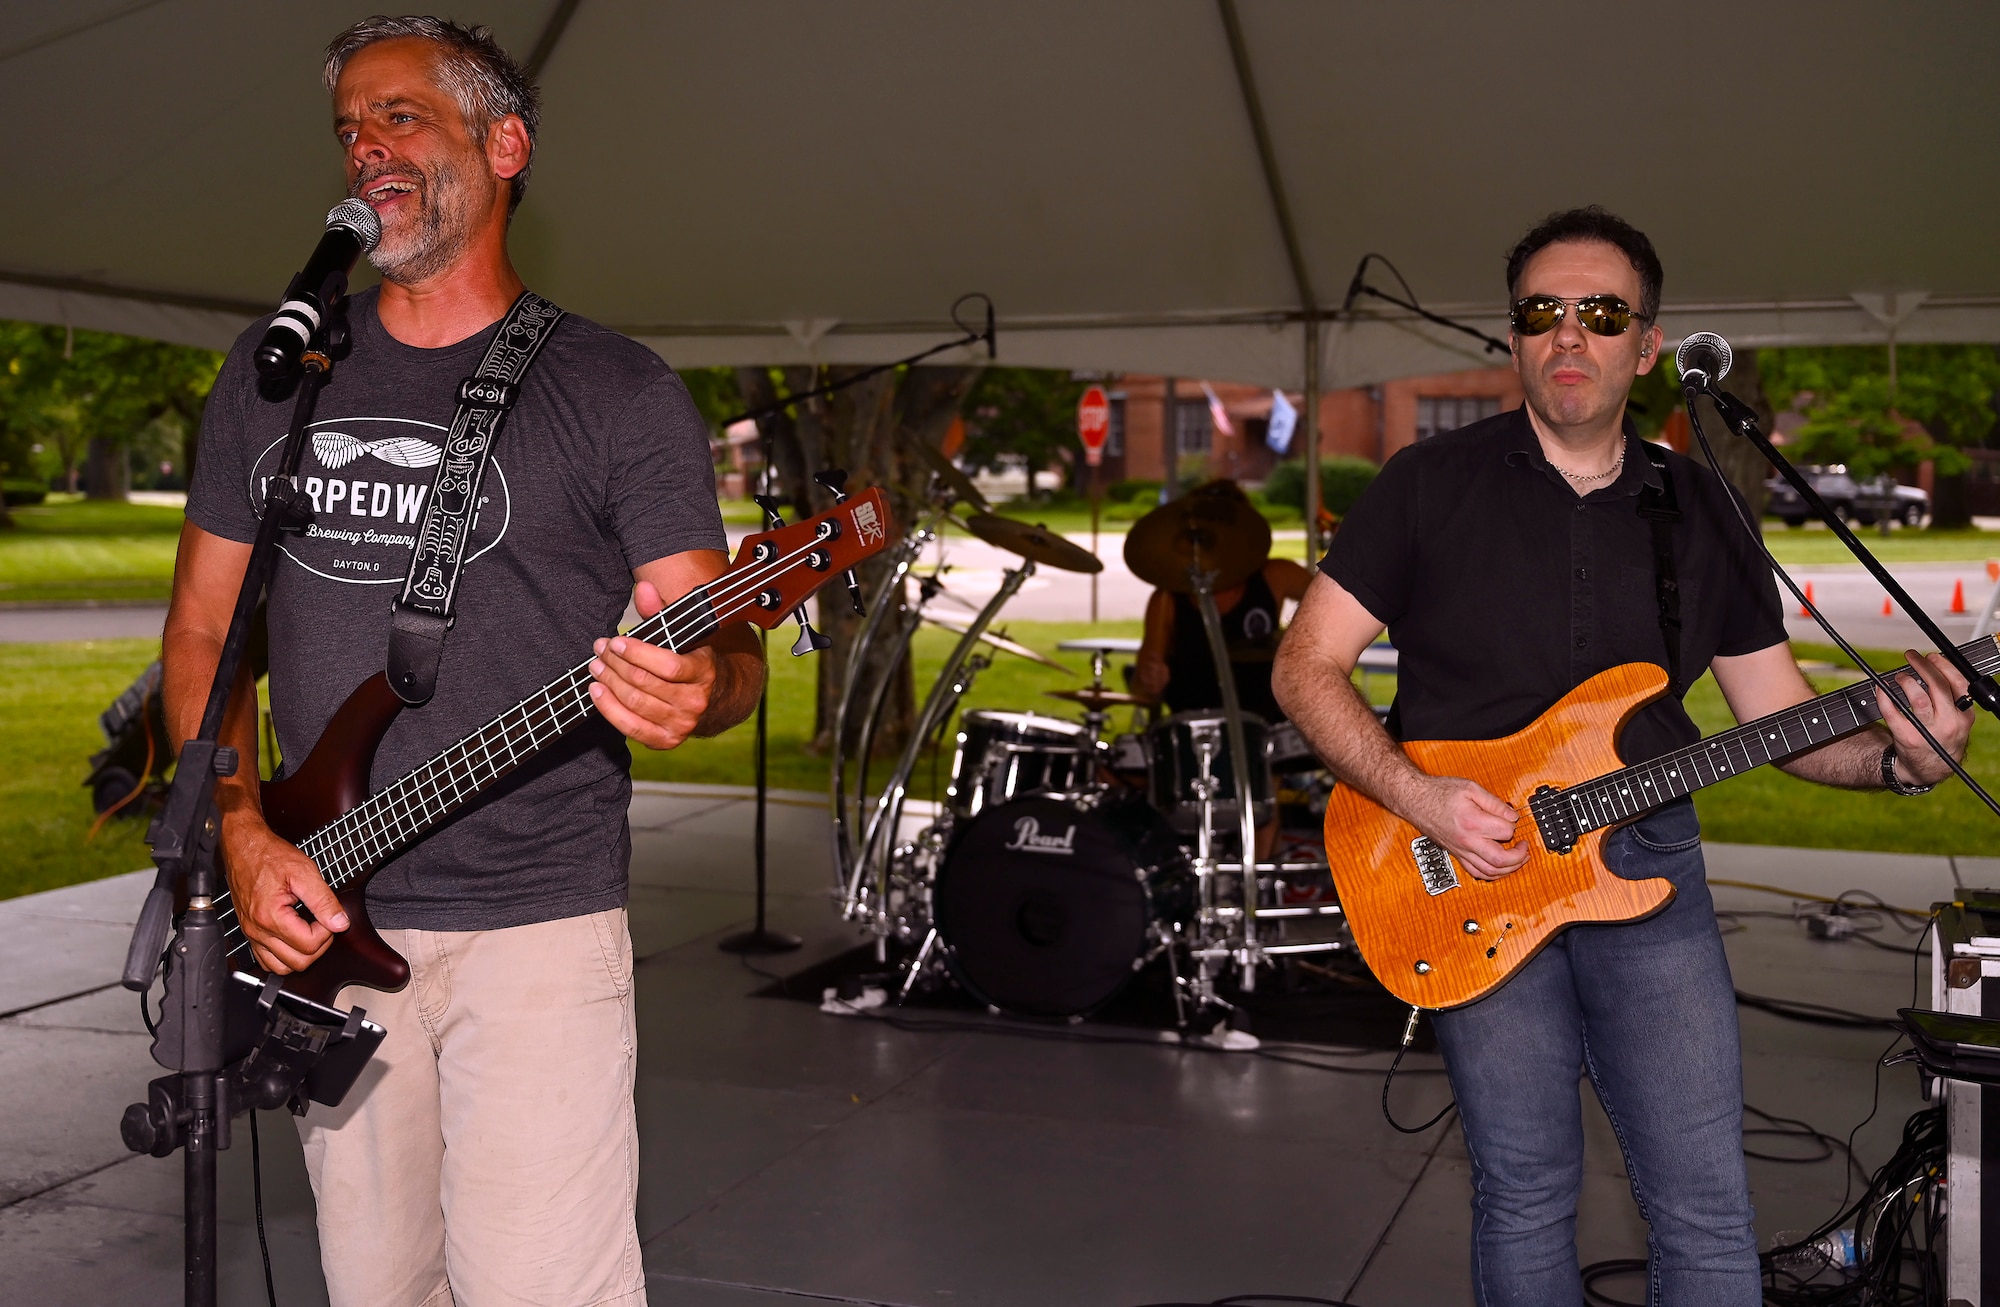 Dave Garwood (left) provides lead vocals and bass while David Hurley plays guitar for Velvet Crush during the first Block Party Concert at Turtle Pond in the brick quarters historic district June, 24, 2021, at Wright-Patterson Air Force Base, Ohio. Other block parties scheduled by the 88th FSS are set to include performances by Stranger, a band specializing in the hits of the 1980s, and Parrots of the Caribbean, which is a salute to Jimmy Buffett. (U.S. Air Force photo by R.J. Oriez)